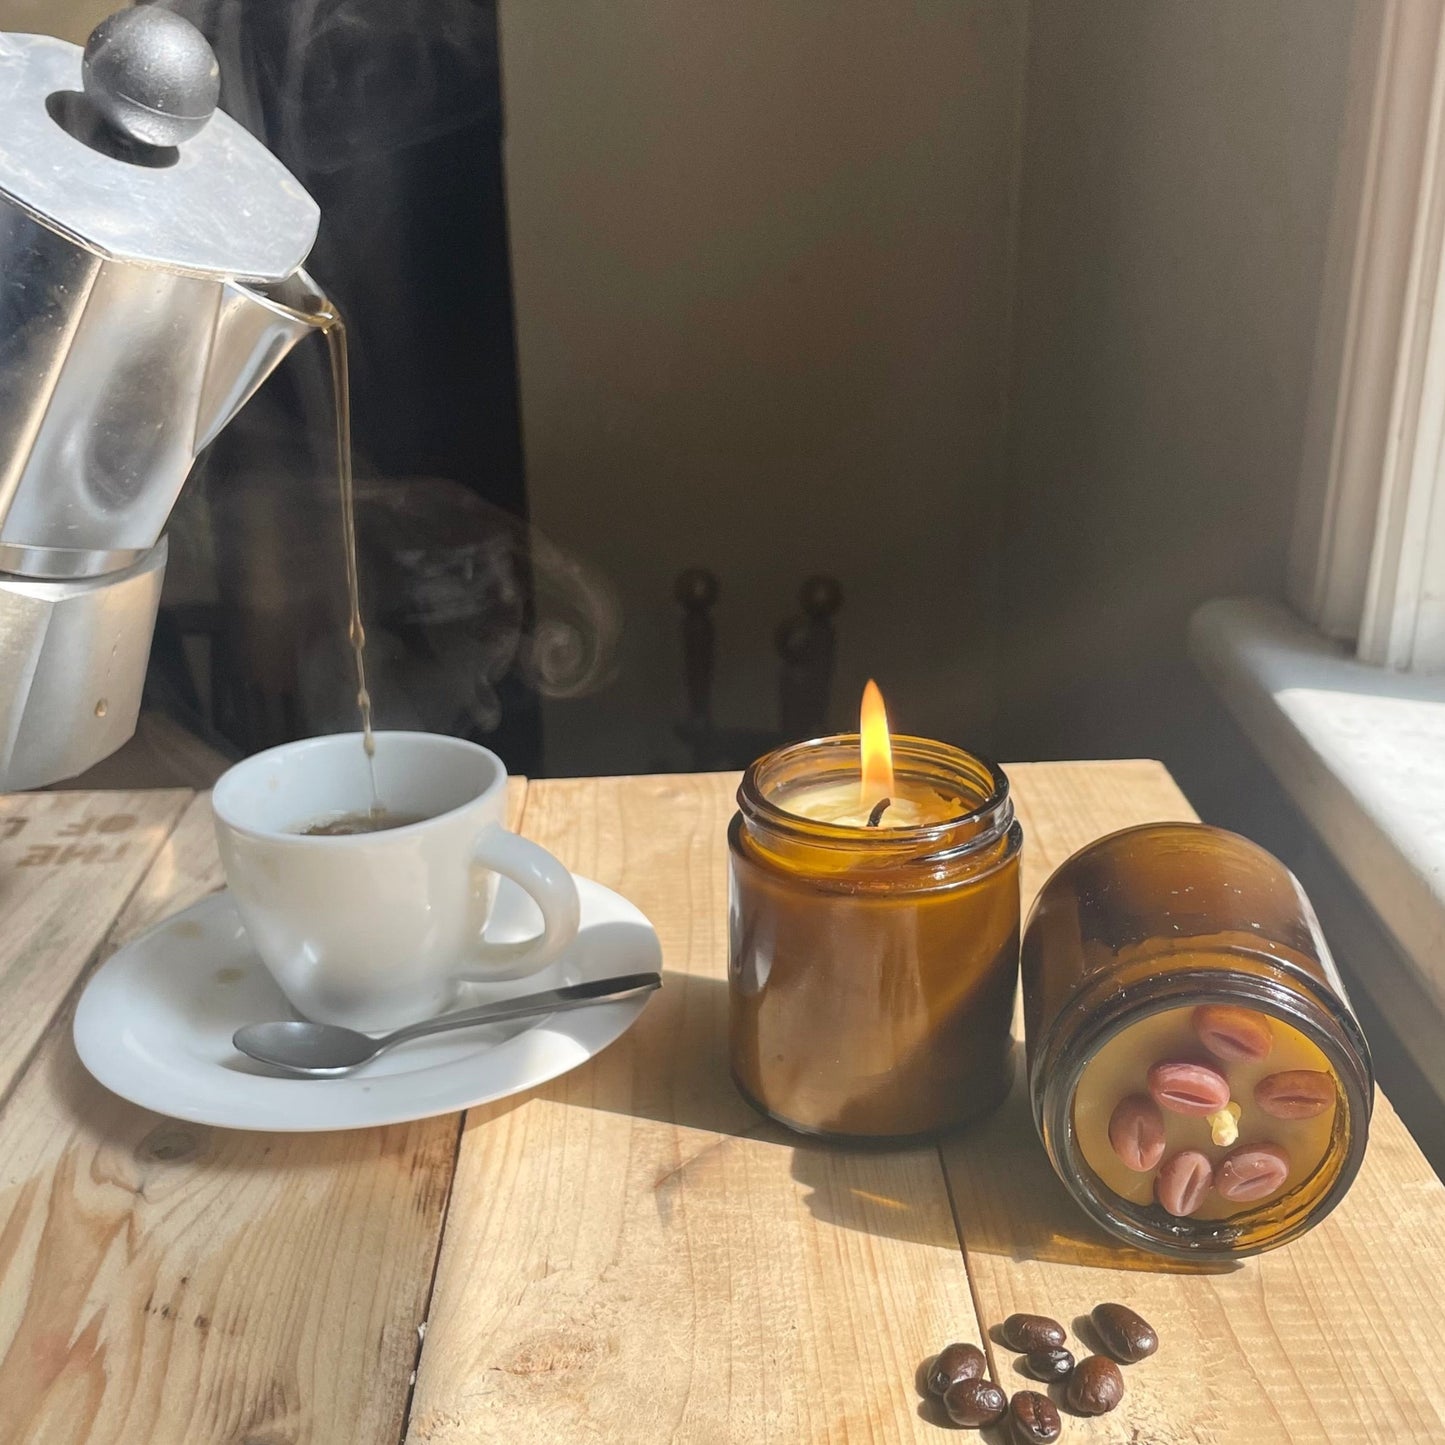 Coffee Candle - 100% Beeswax Candle - 4 oz. Amber Glass Jar / Beeswax Candle  - Jar Candle, Beeswax, Essential Oils